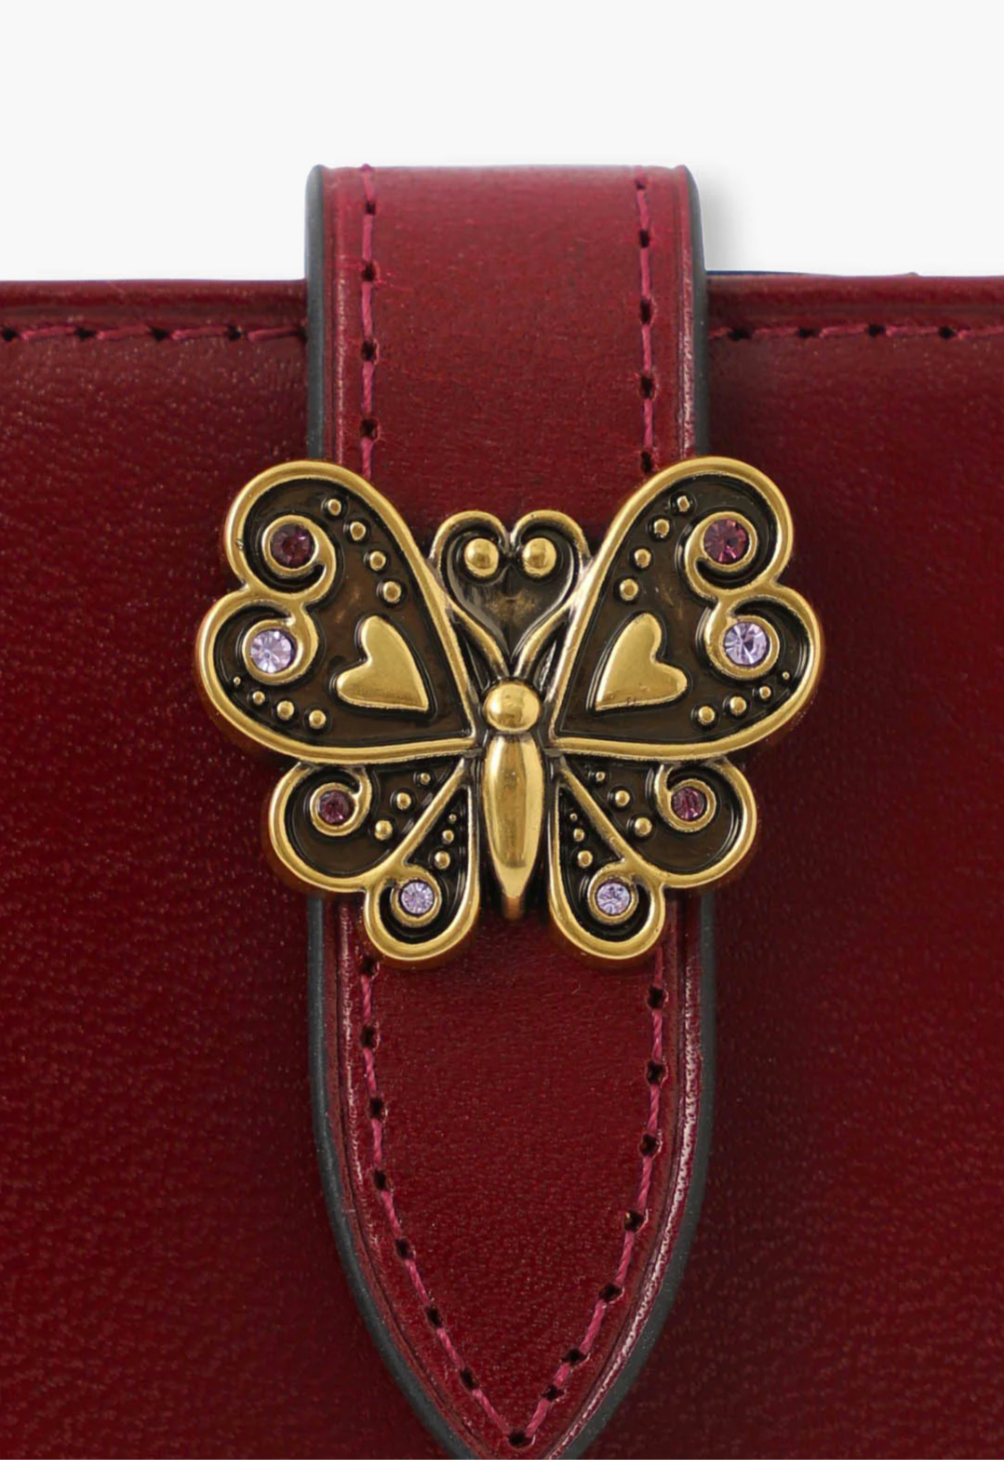 Small Roger Wallet wine detail of Anna Sui golden butterfly hardware on flap, wine stiches 